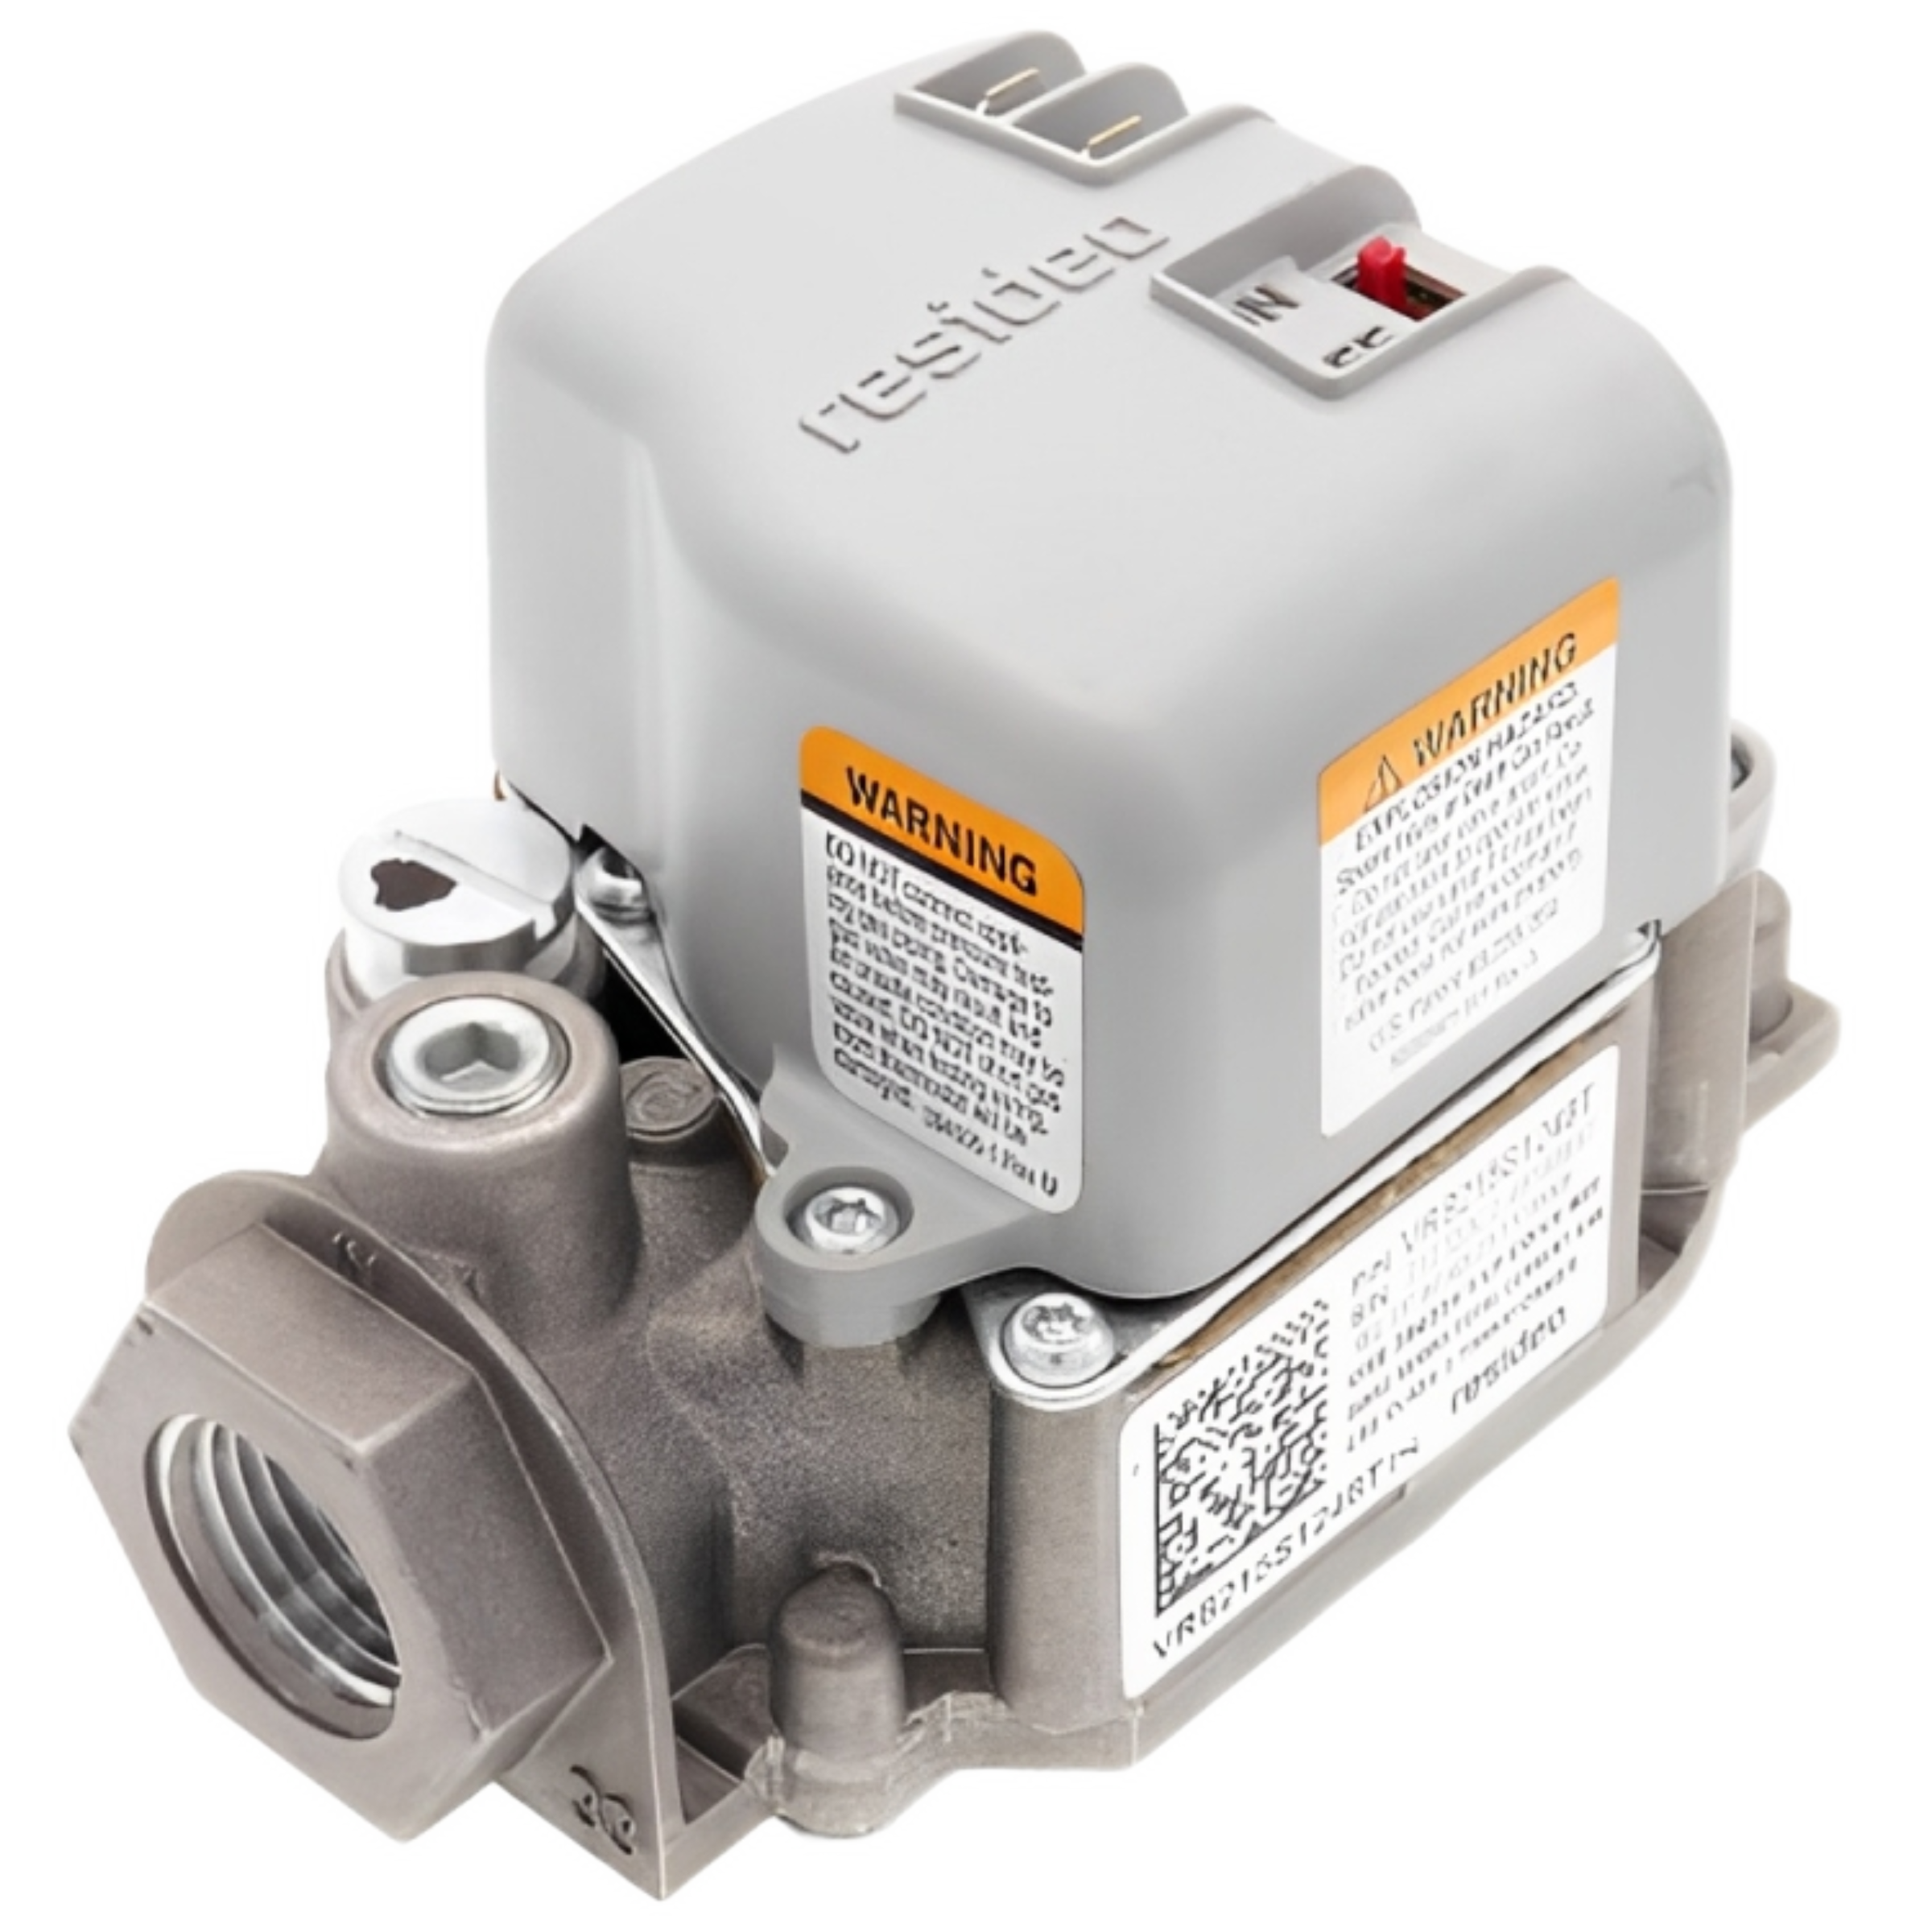 VR8215S1248T Honeywell Home Dual Direct Ignition Natural Gas Valve 24V, Single Stage, Standard Opening Max. Capacity 200,000 BTUh, 1/2 in. x 1/2 in., 3.5" wc